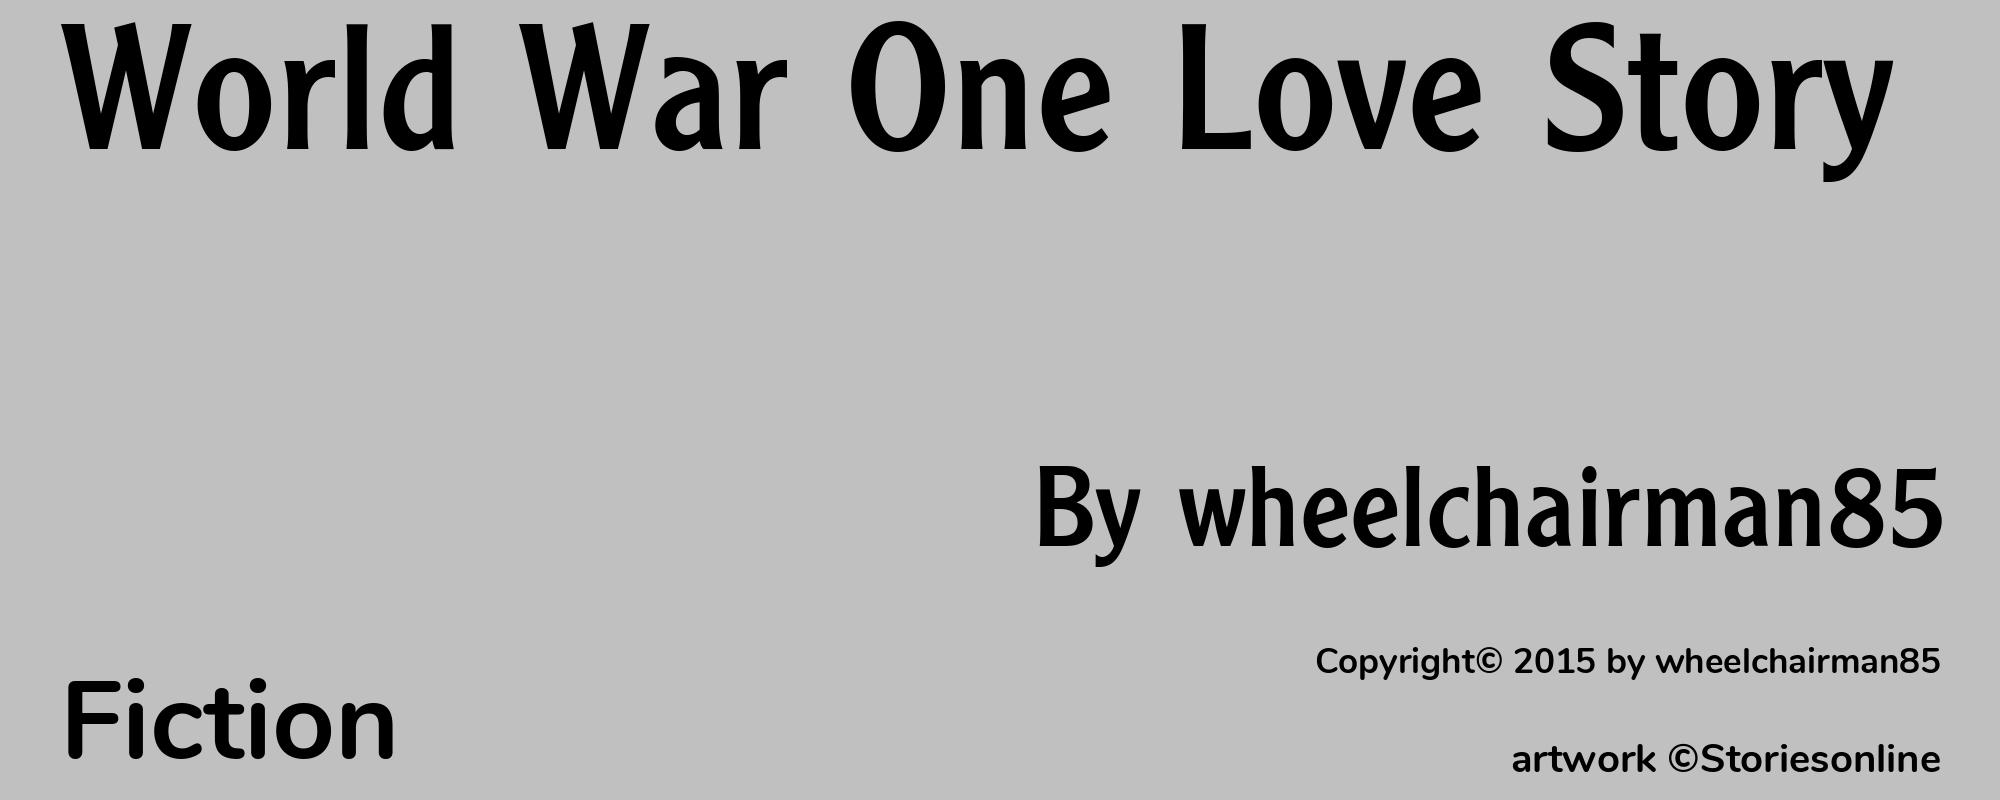 World War One Love Story - Cover